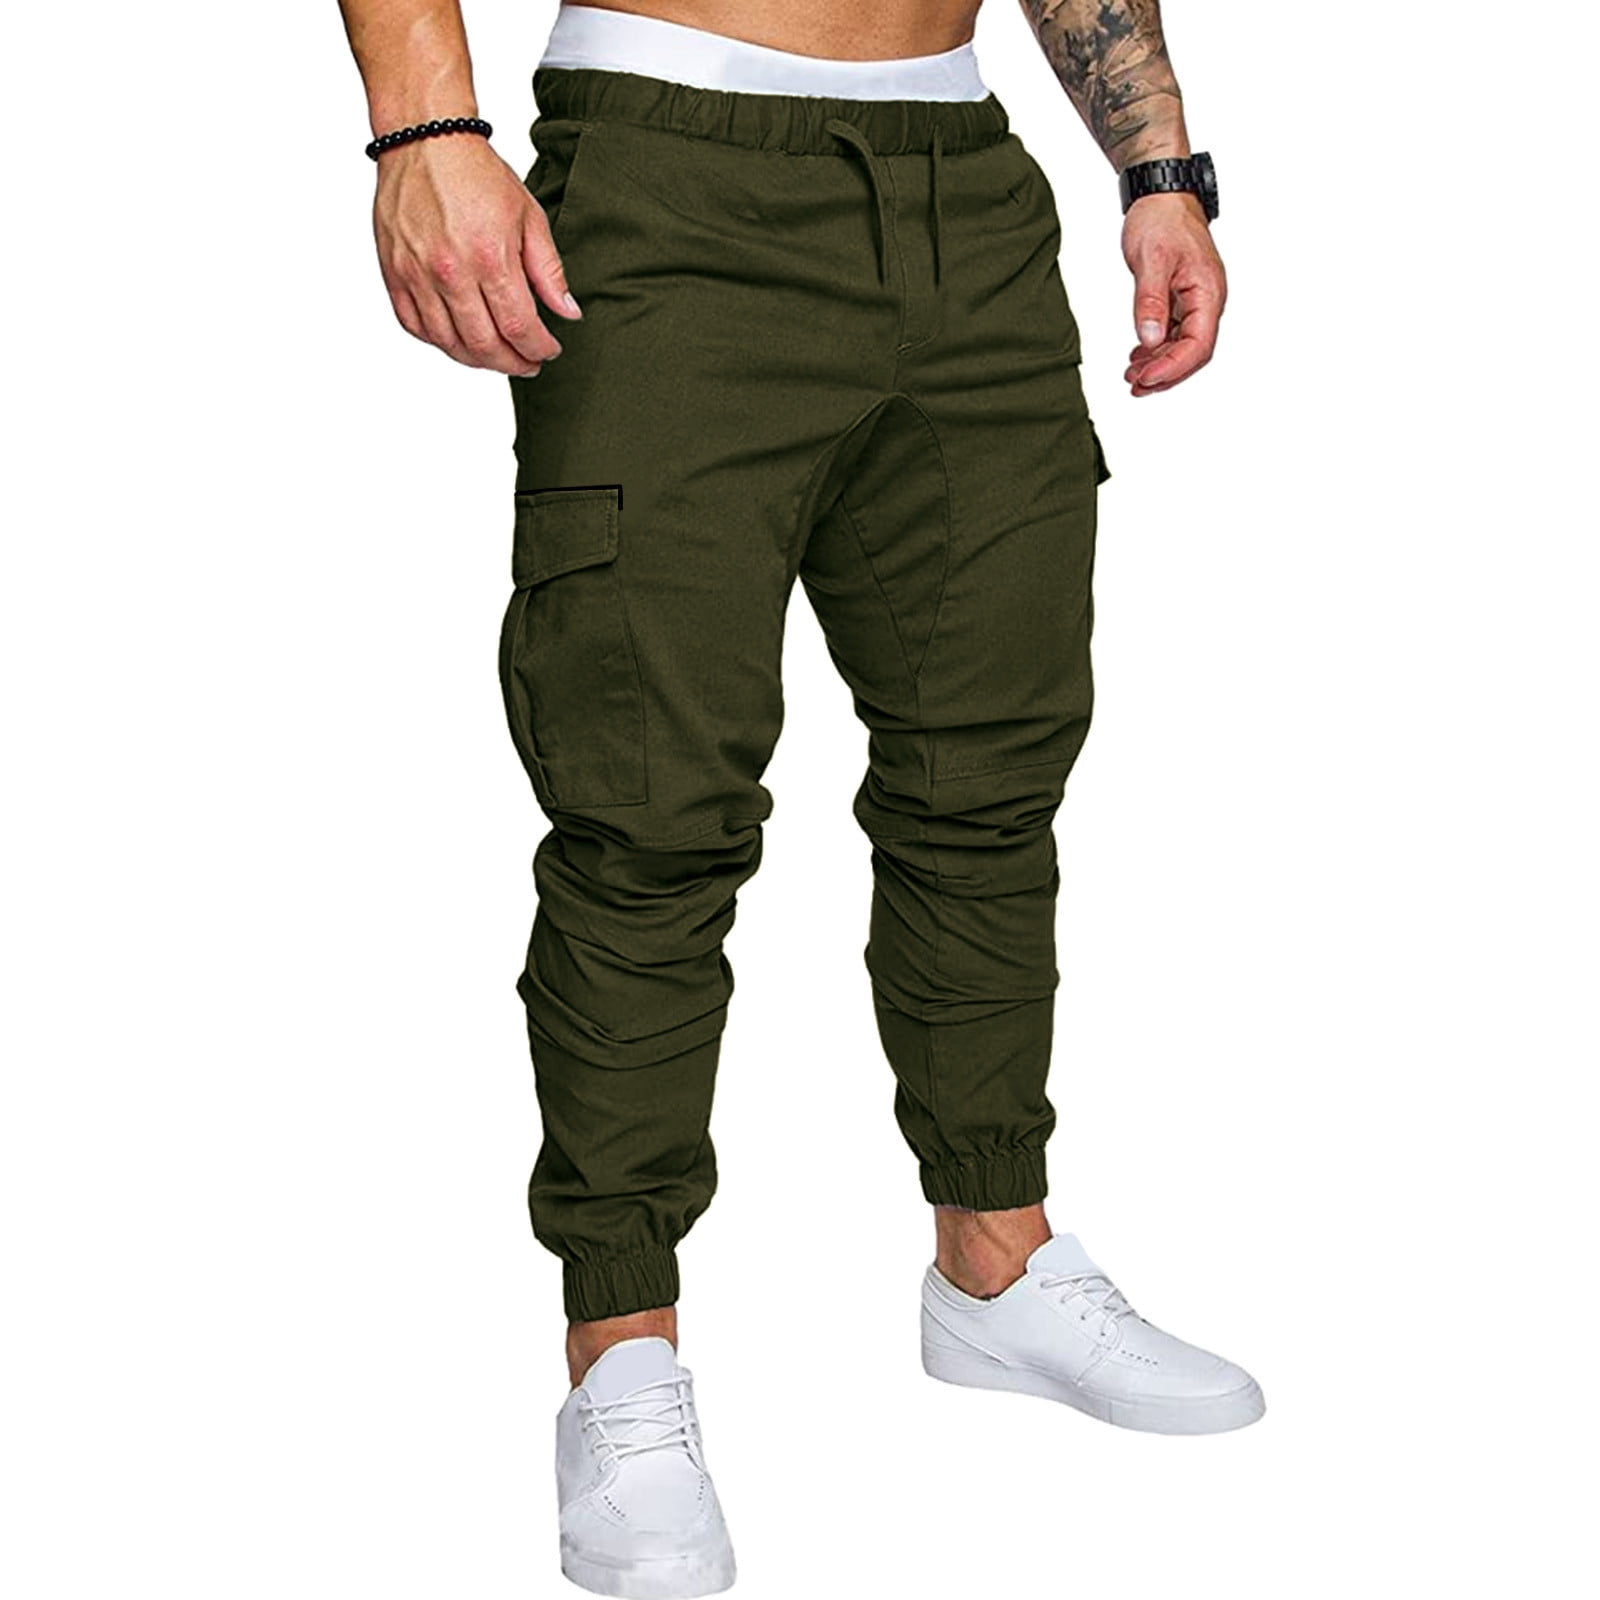 Stylish and Versatile Green Cargo Pants Outfit for Women